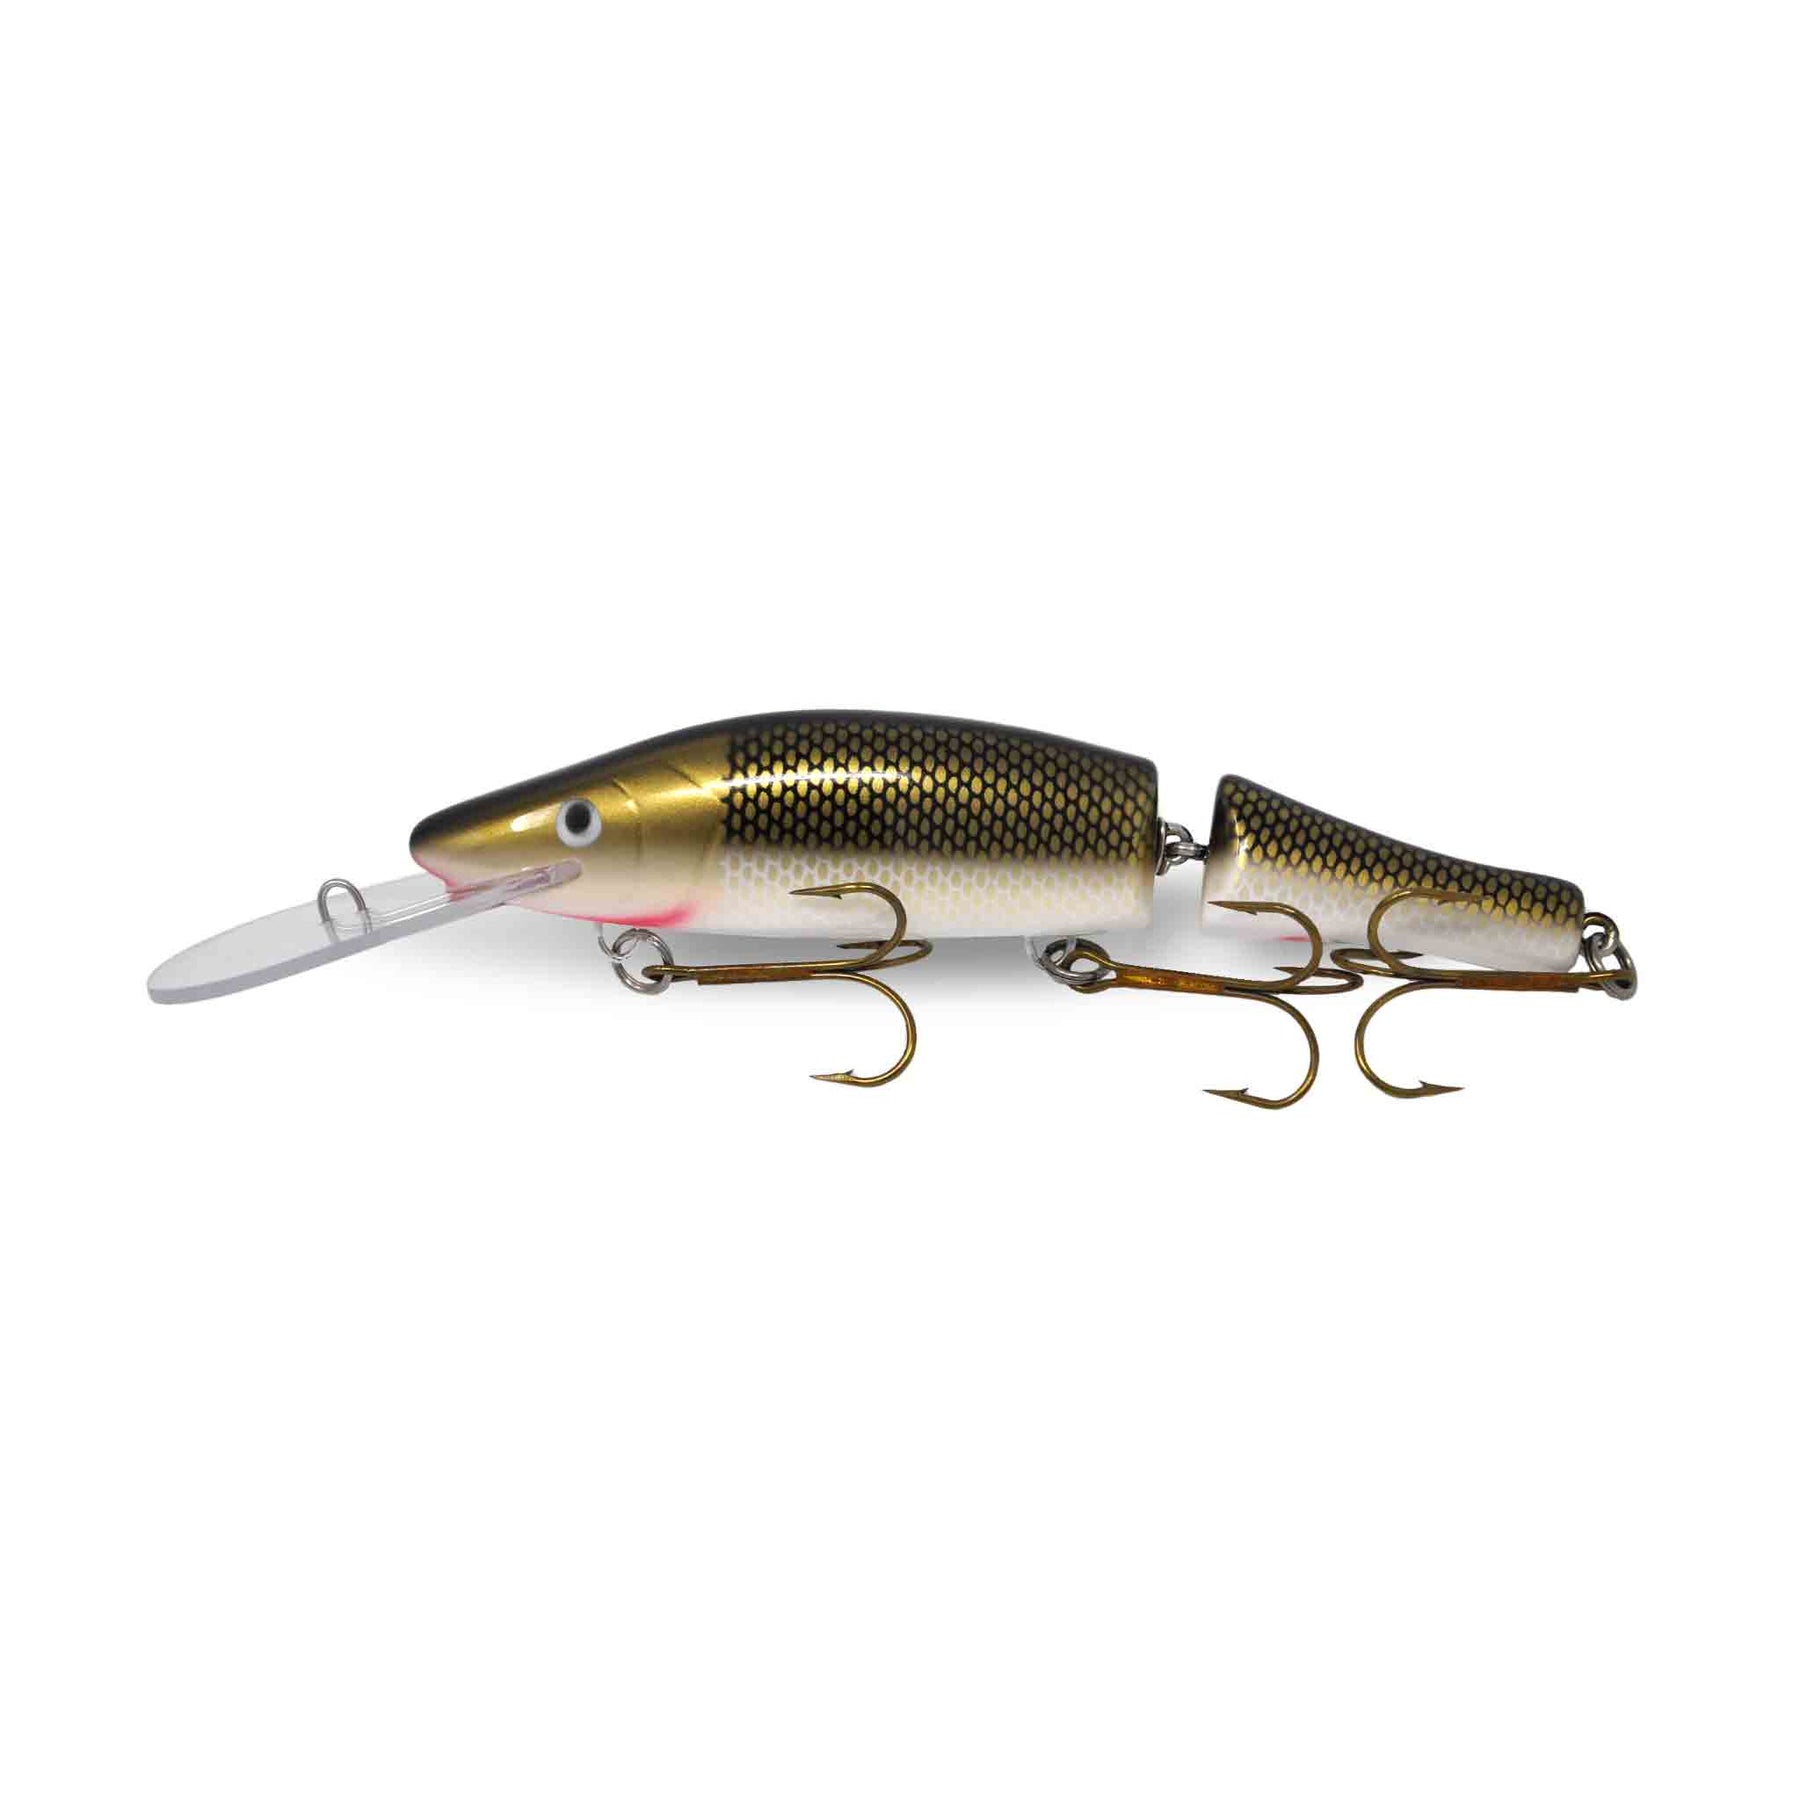 View of Crankbaits Legend lures Jointed Perch Bait Crankbait Golden Sucker available at EZOKO Pike and Musky Shop